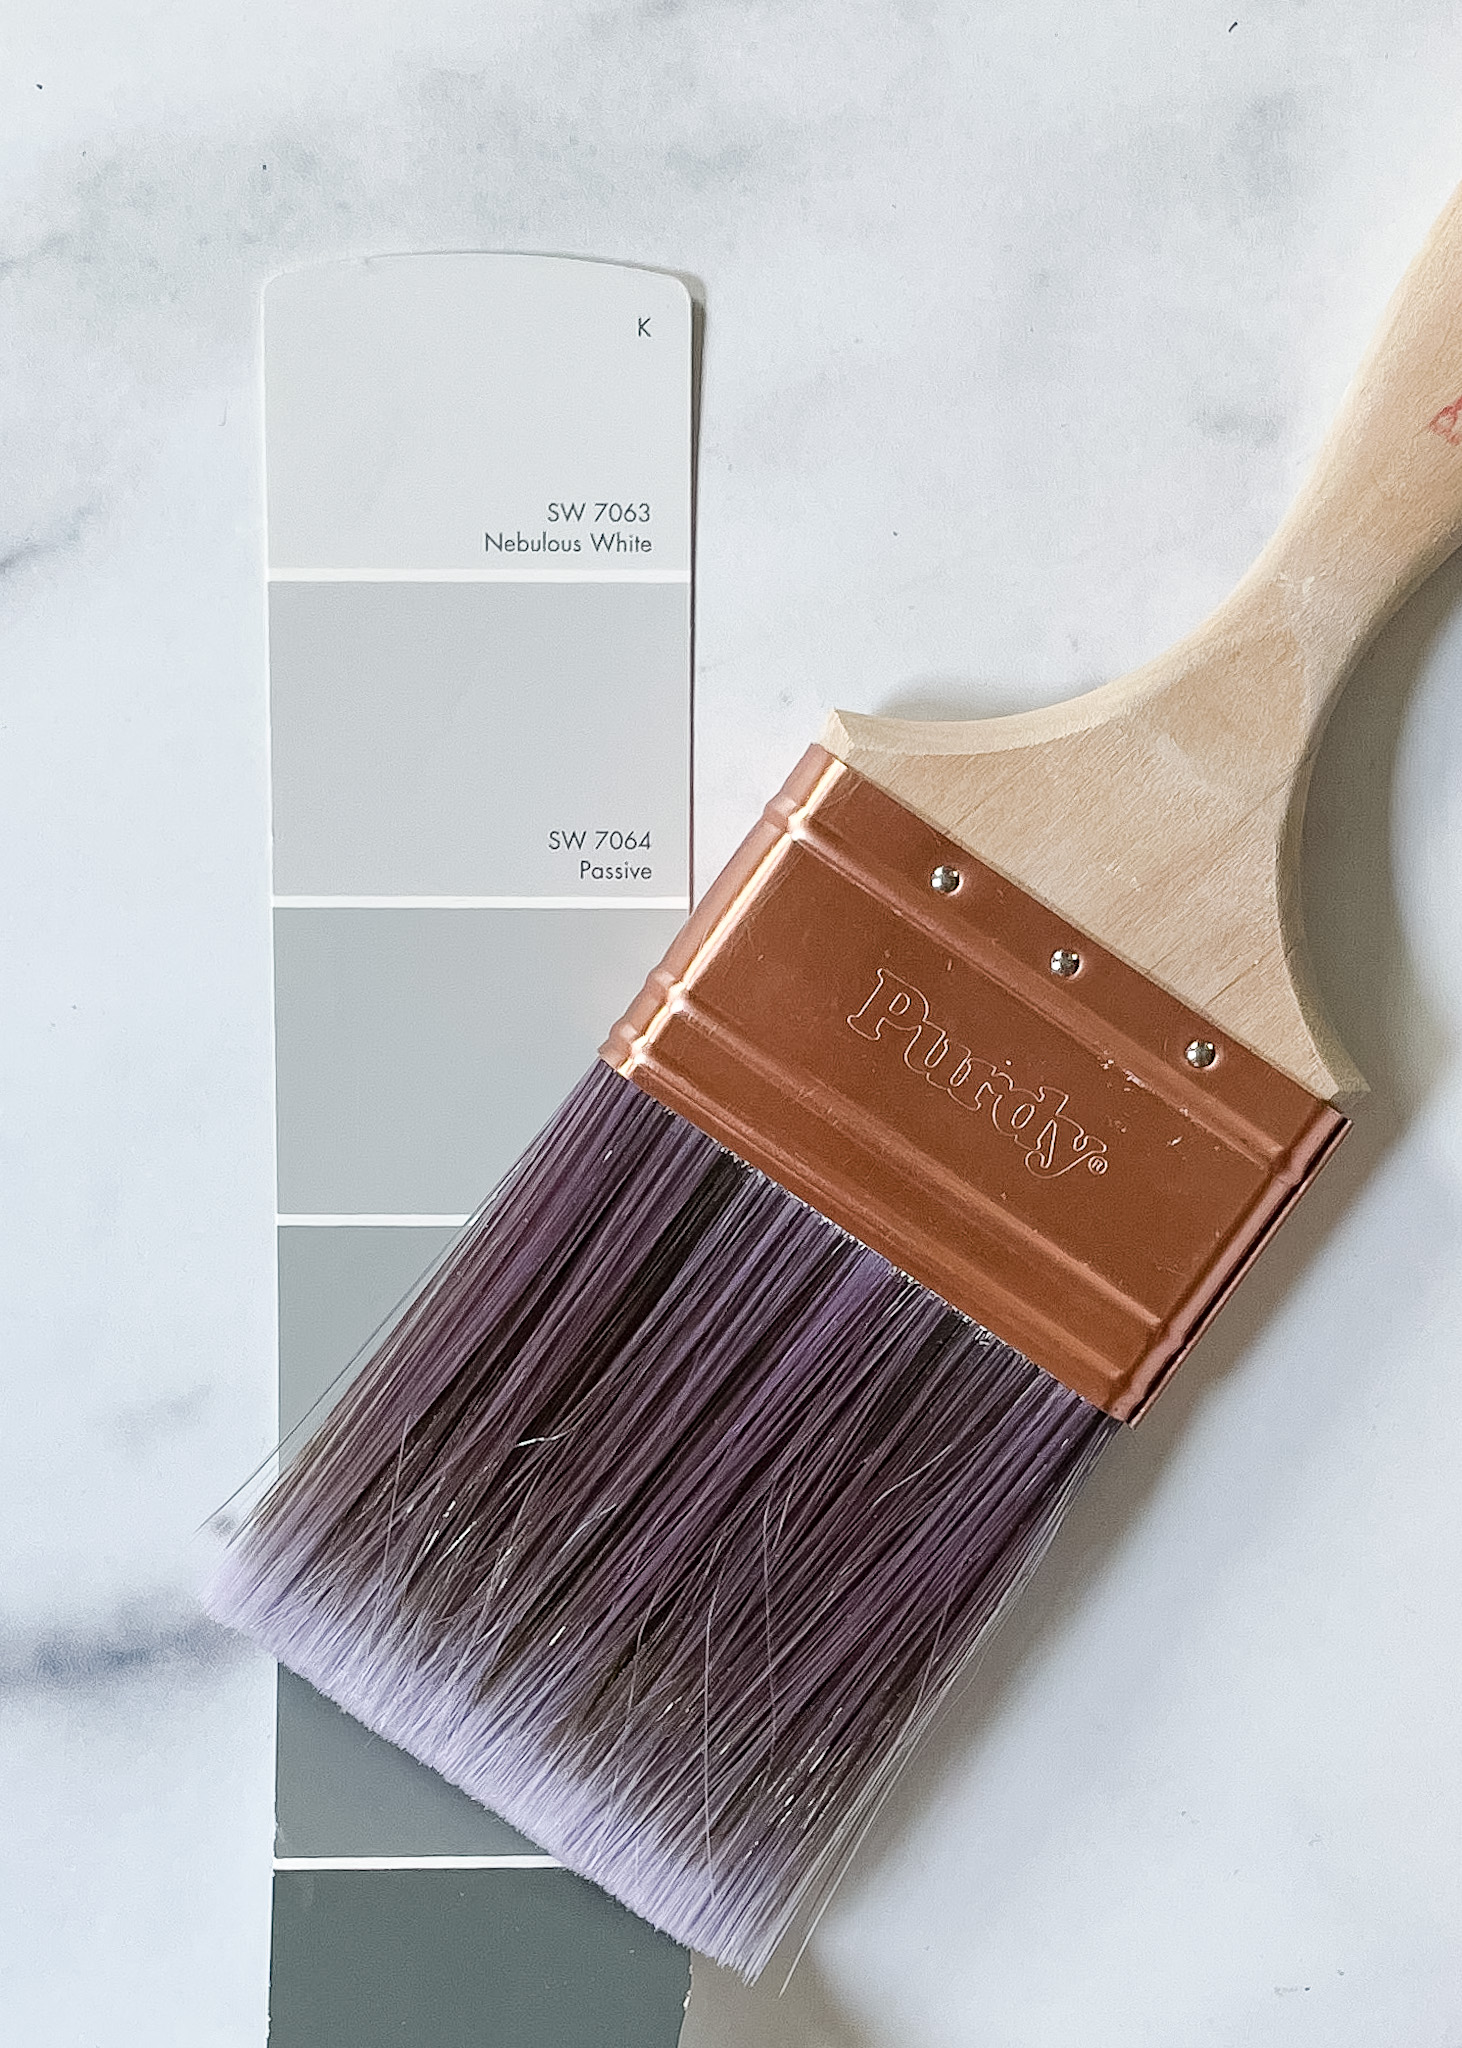 SW nebulous white paint swatch with brush